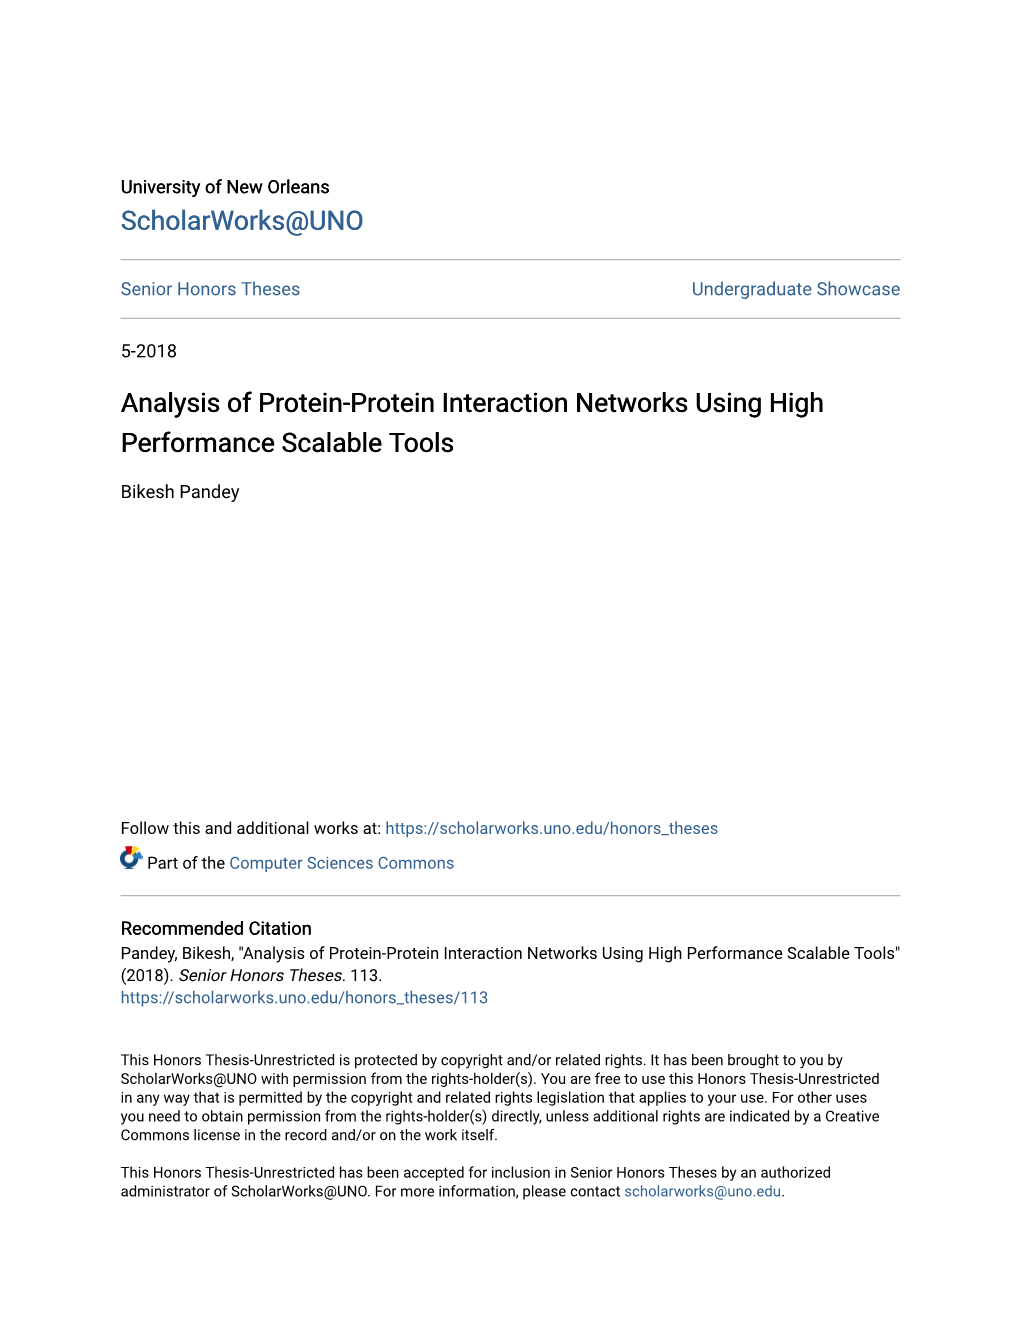 Analysis of Protein-Protein Interaction Networks Using High Performance Scalable Tools